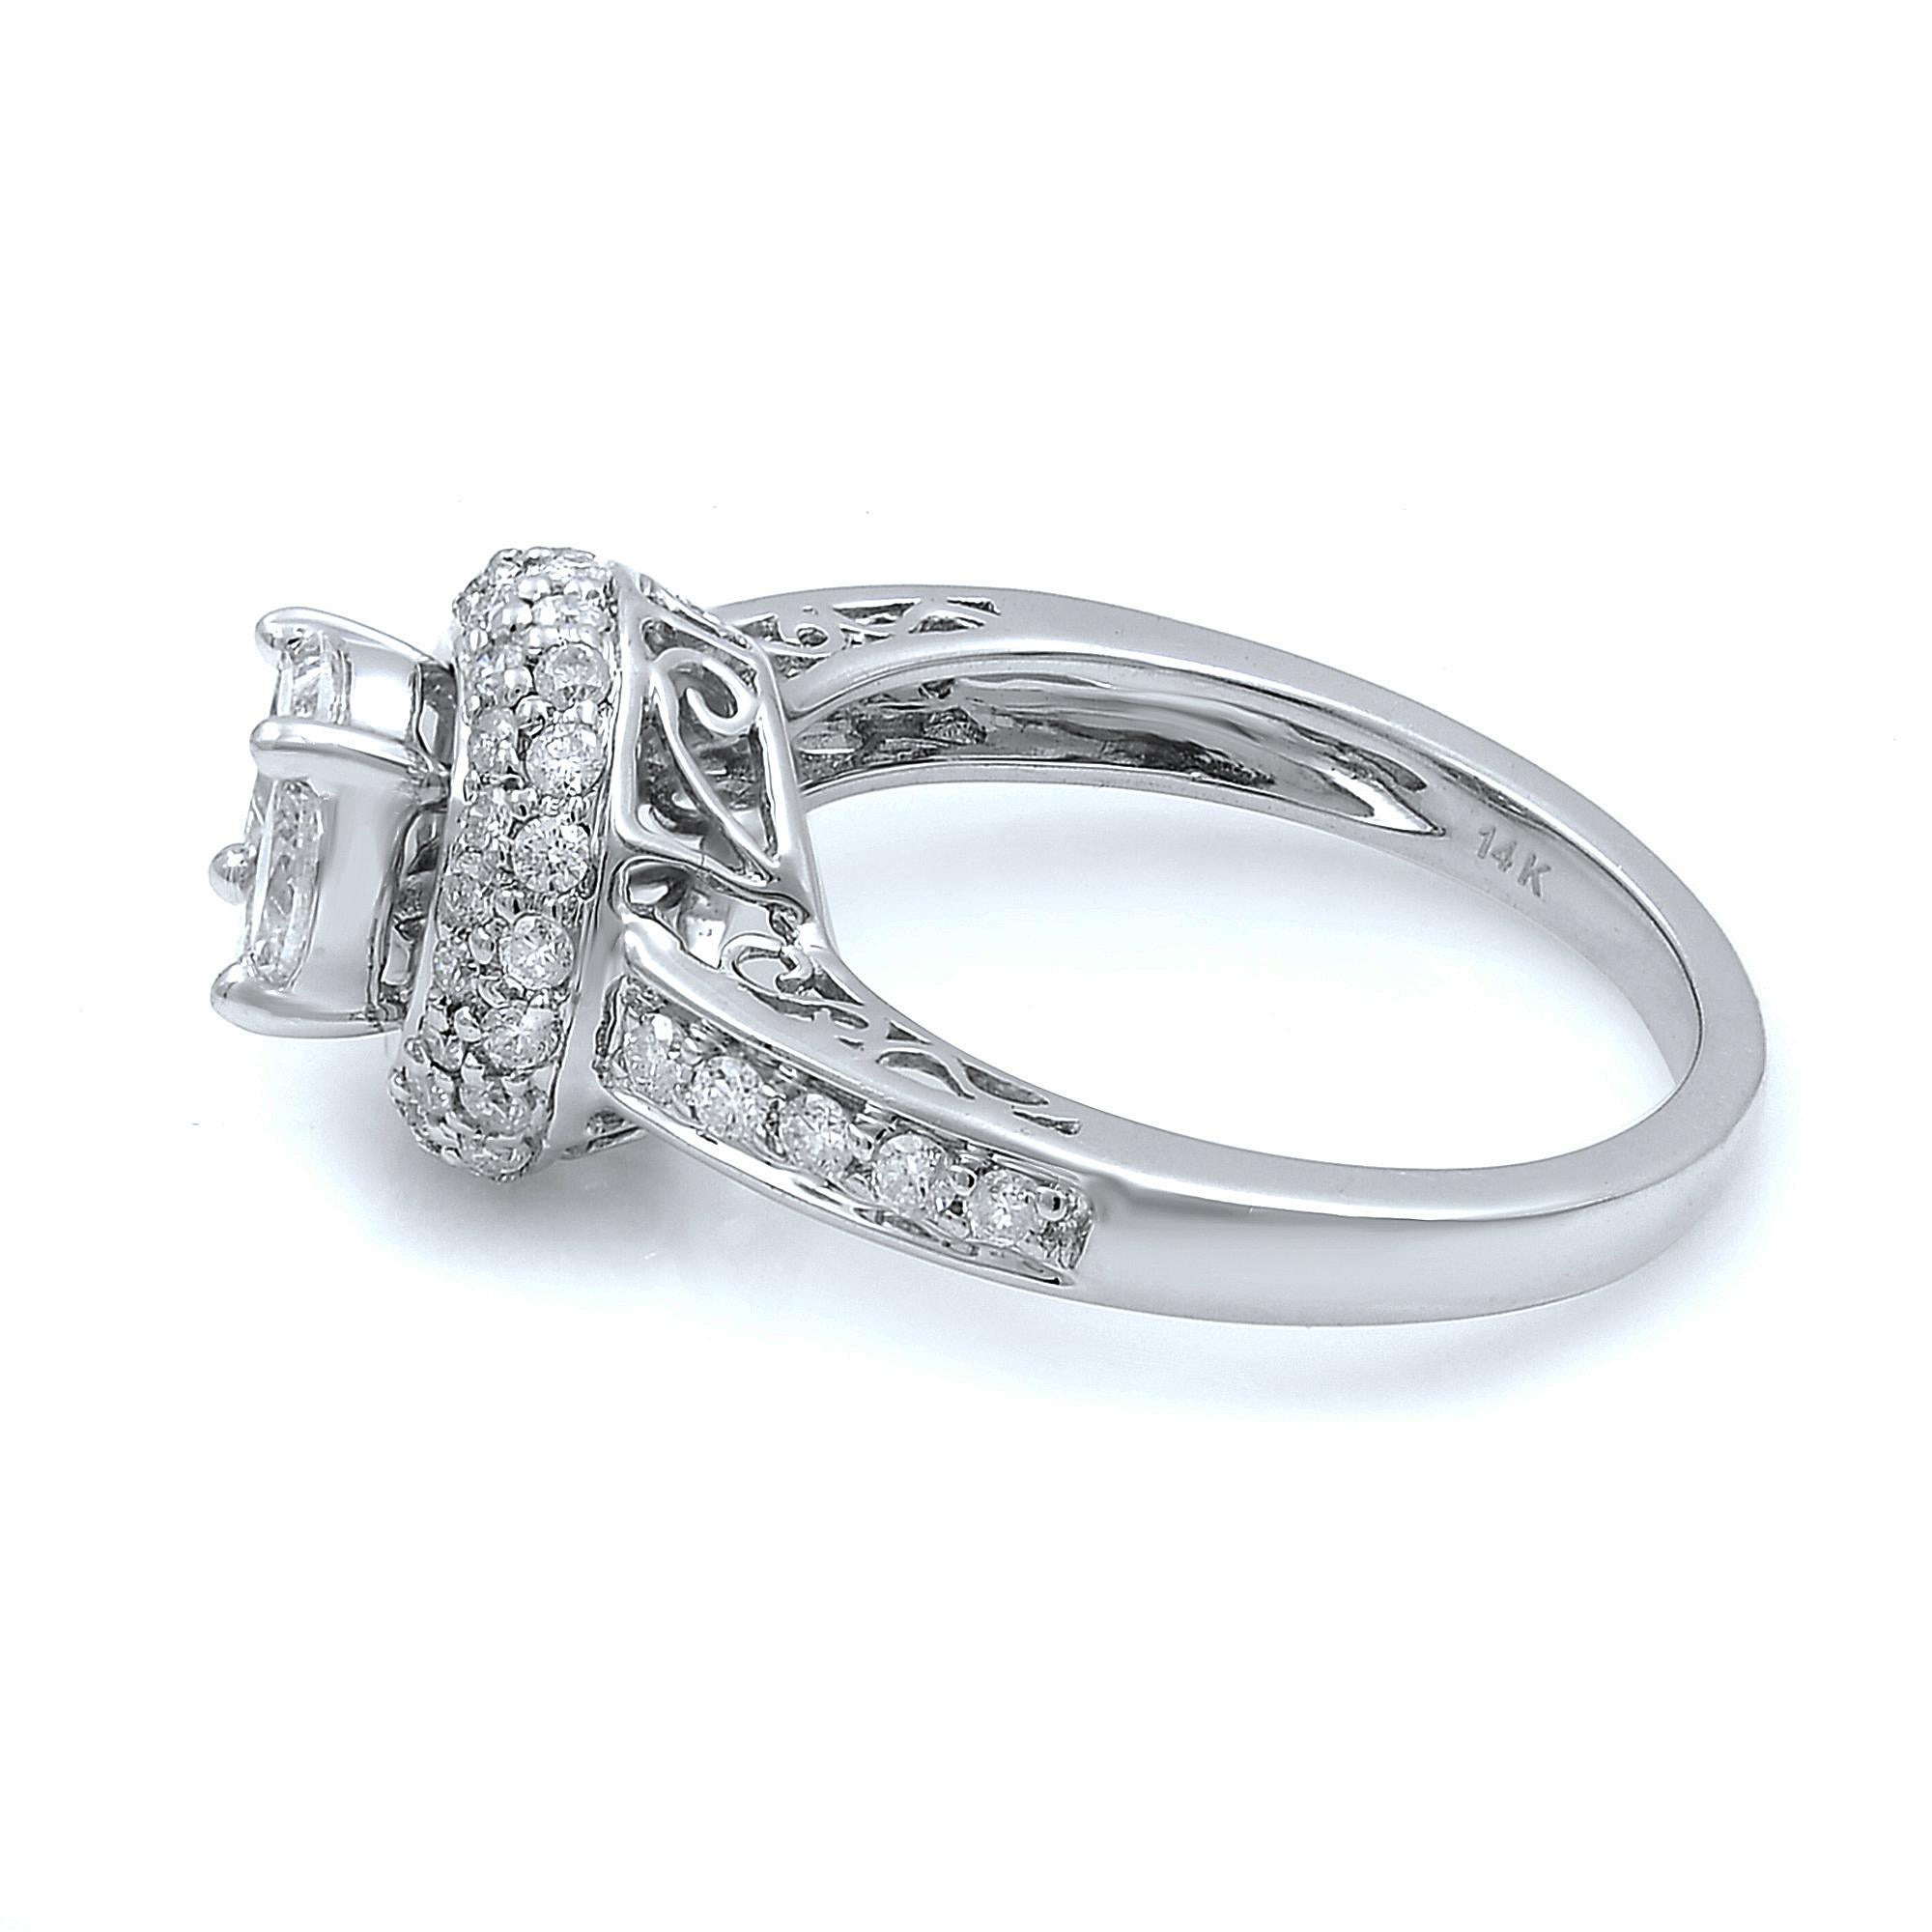 This elegant diamond engagement ring features 14k white gold with 1.13 carats of brilliant round cut diamonds. Center round shape has 1 princess cut diamond and 4 marquise cut diamonds. Halo and shank are set with little round cut diamonds in prong